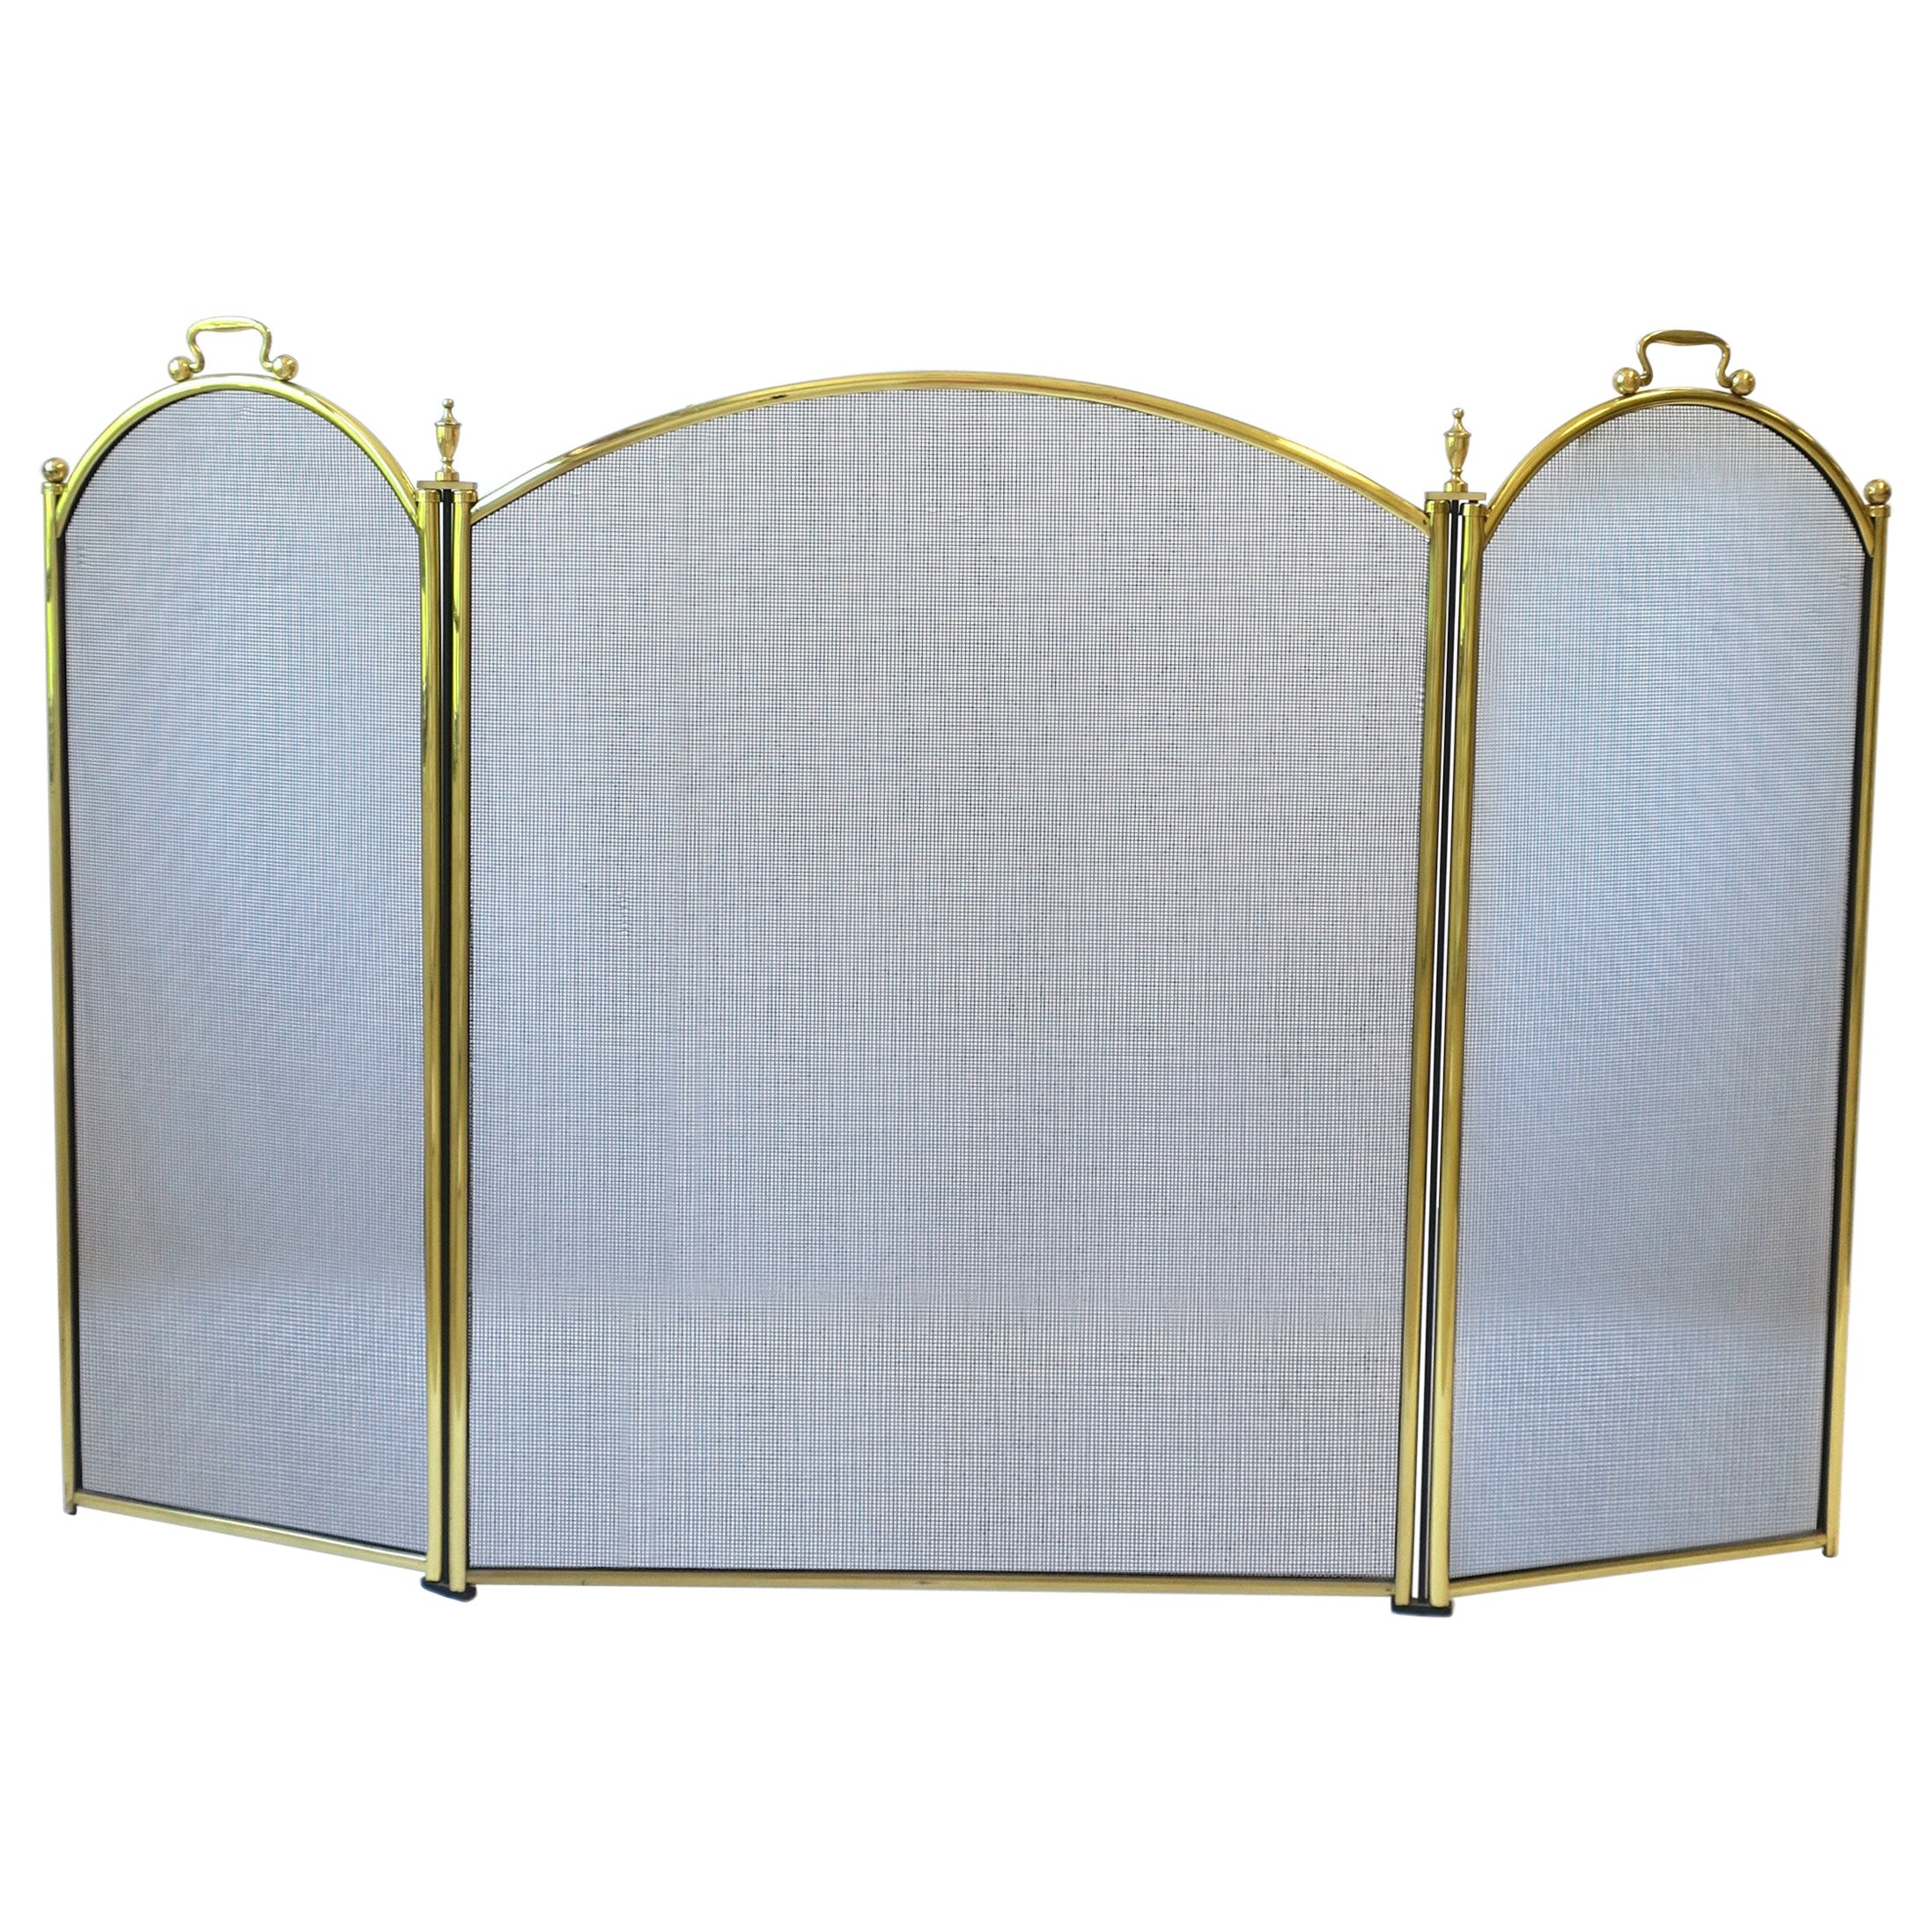 Brass Fireplace Screen with Finial Detail